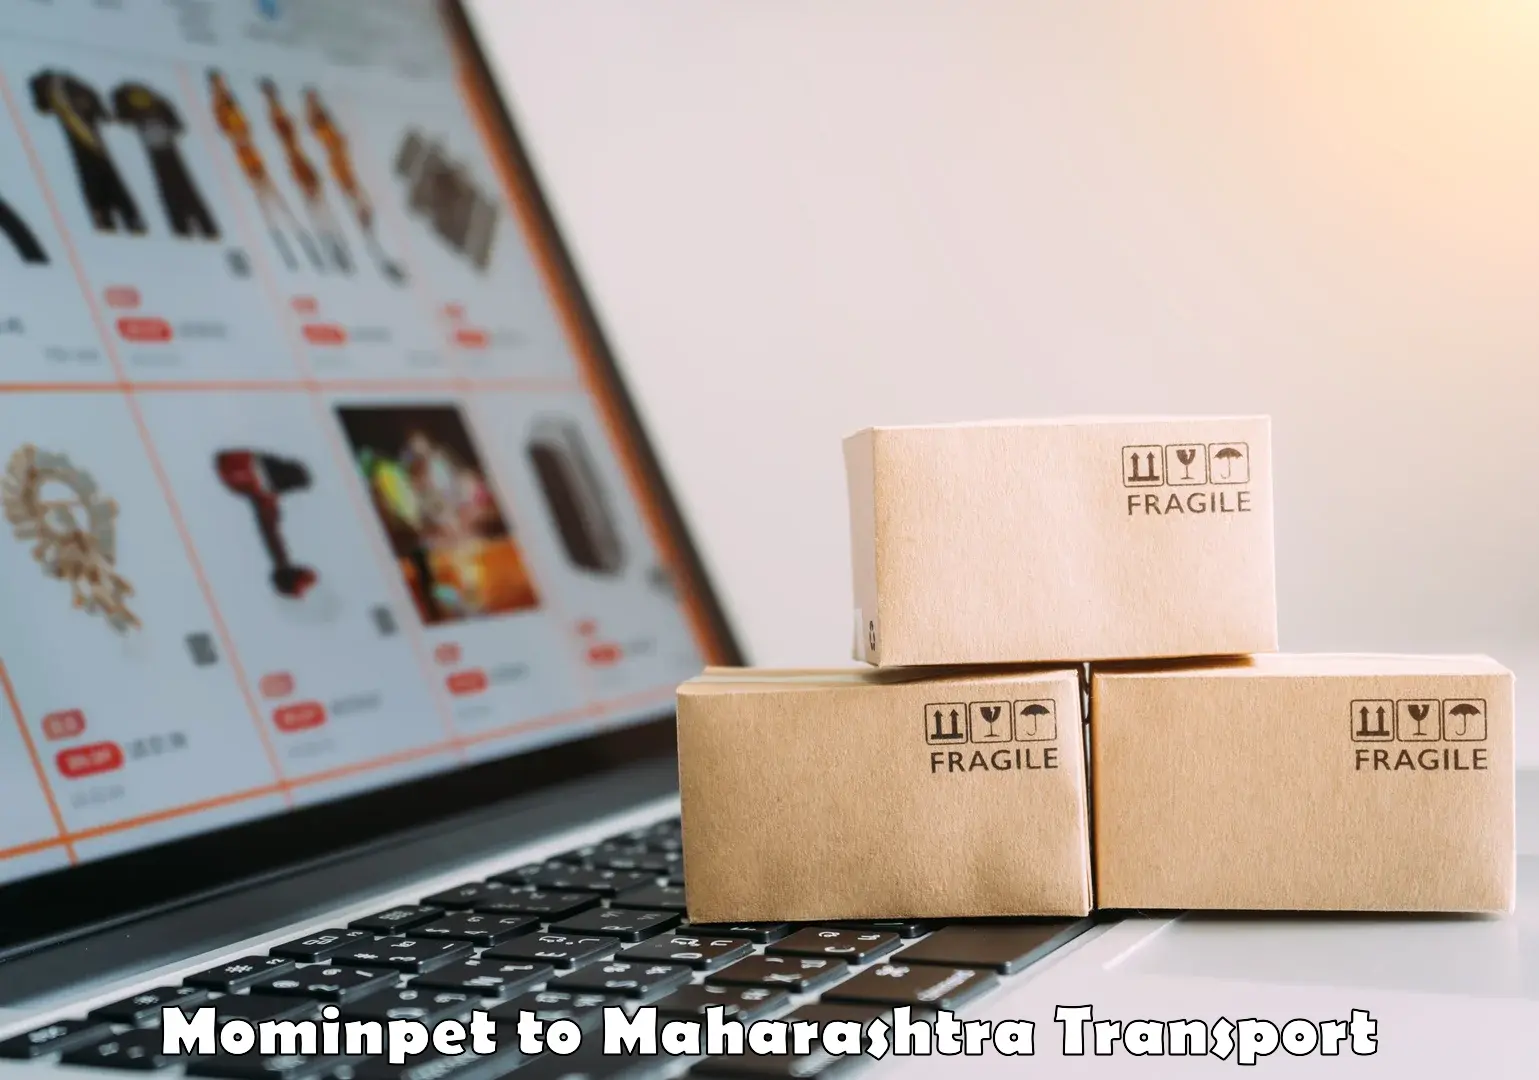 Goods delivery service Mominpet to Kalyan Dombivli